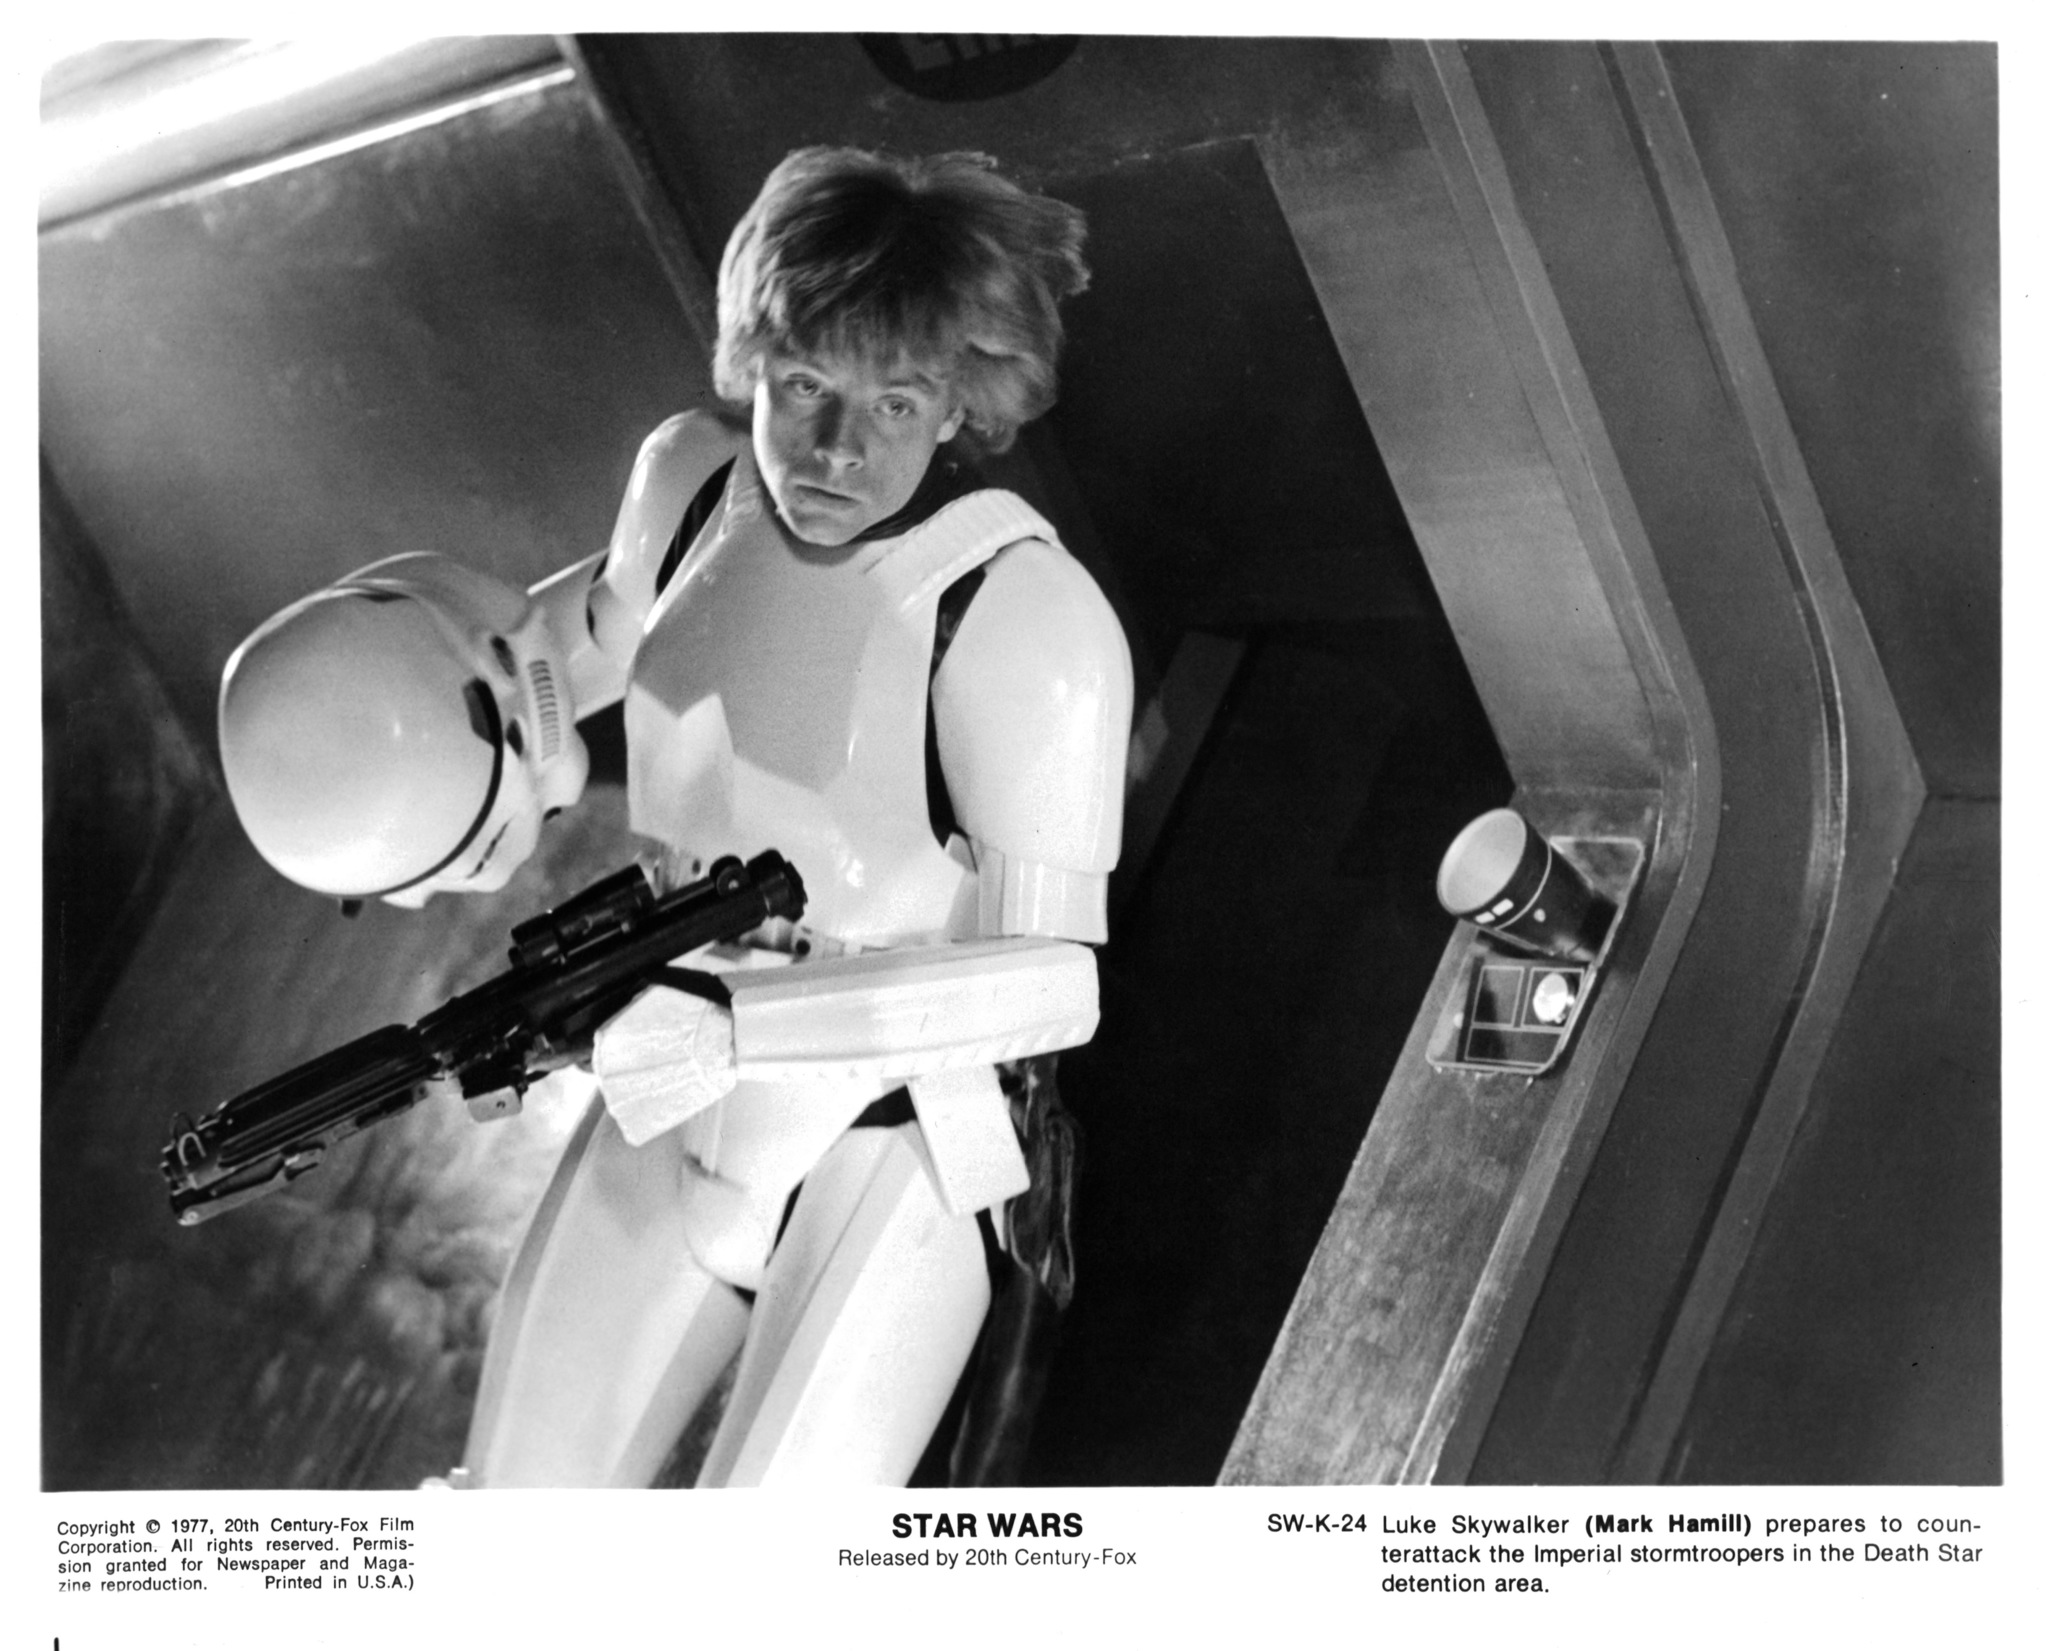 Mark Hamill in Star Wars: Episode IV - A New Hope (1977)